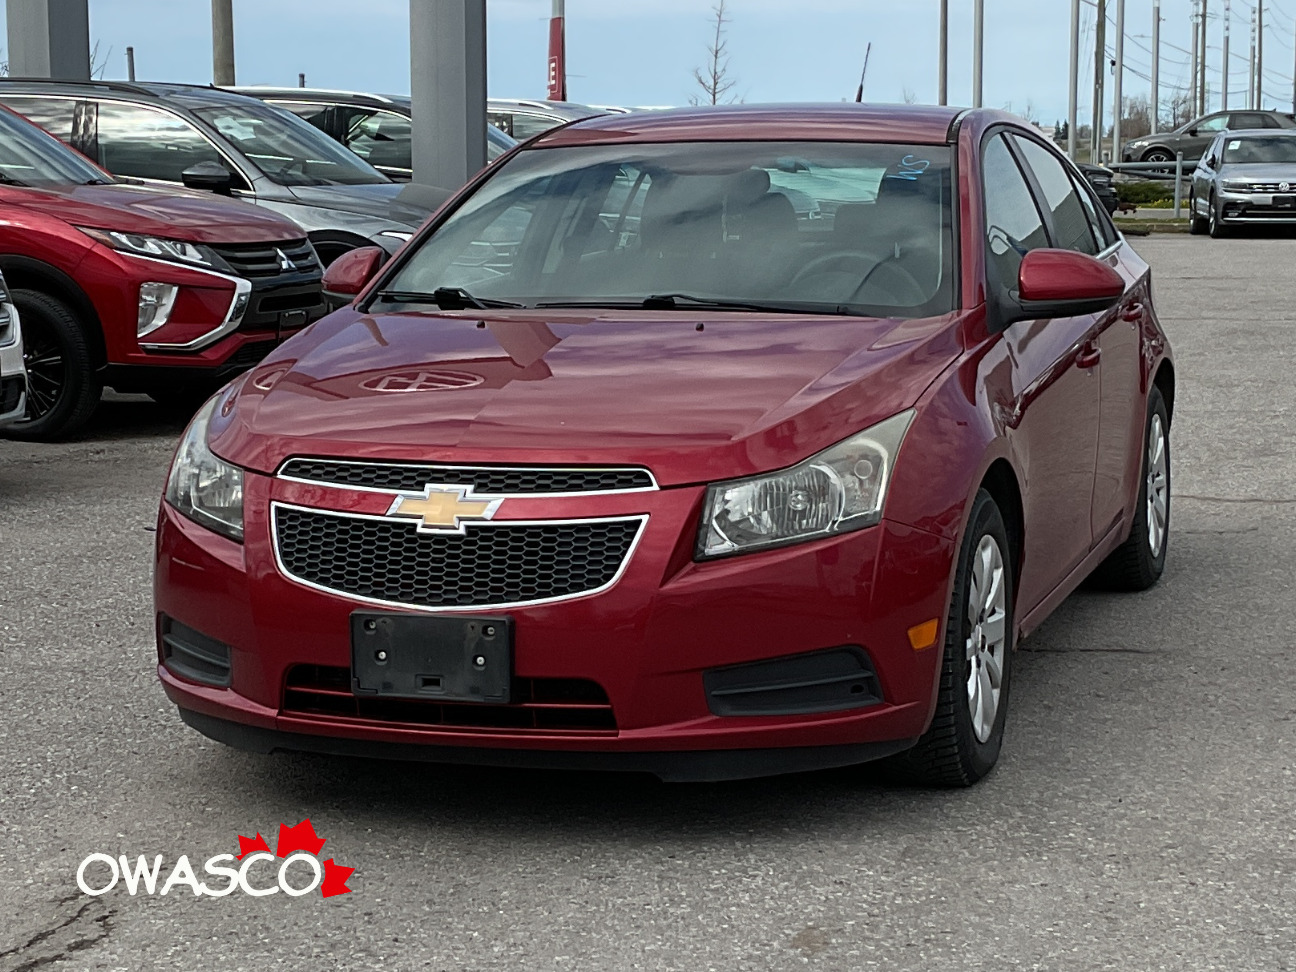 2011 Chevrolet Cruze 1.4L As Is!